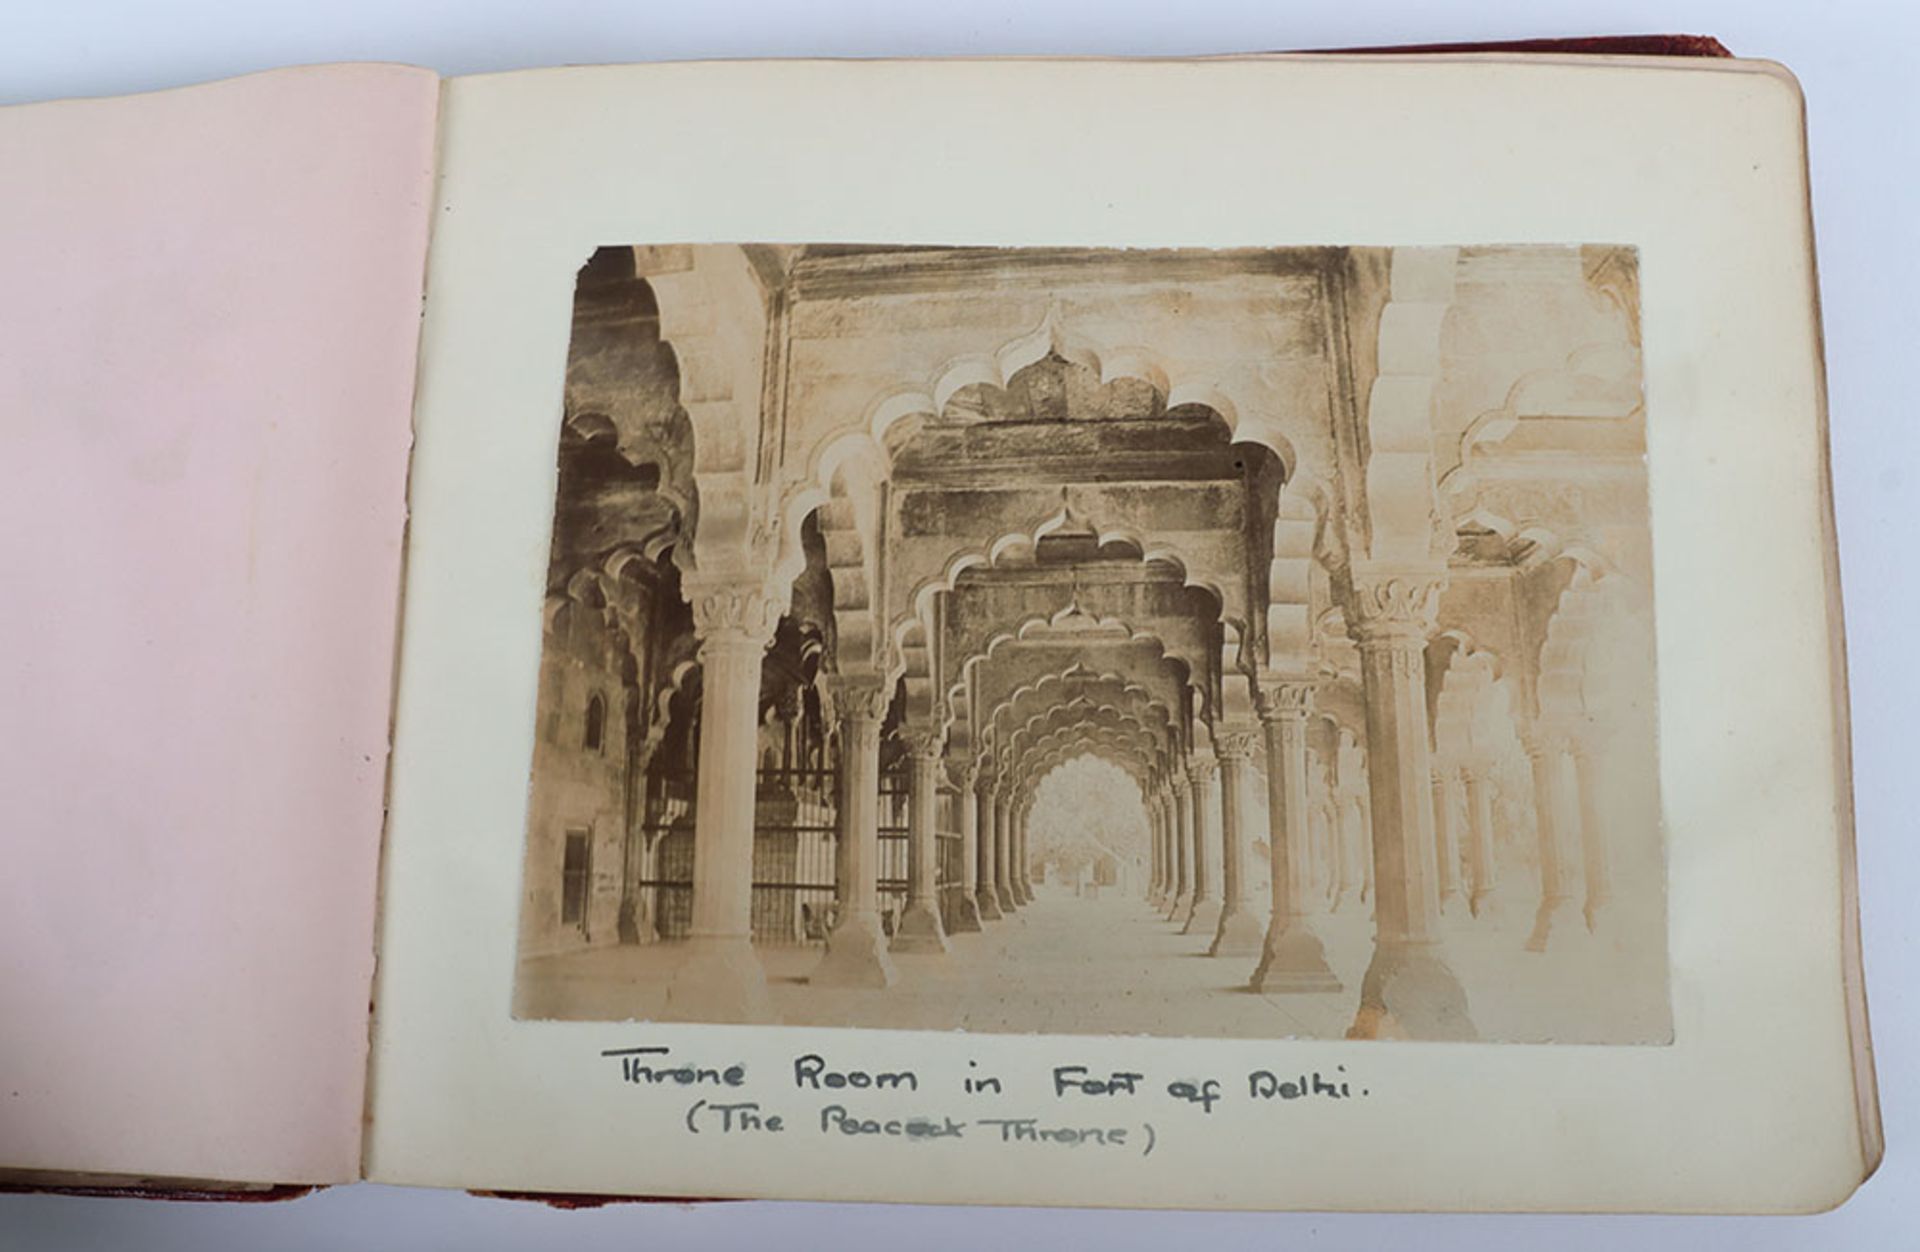 Photograph Album with images of ther Delhi Durbar, troops lining streets, Elephants, sacred cows bel - Image 21 of 48